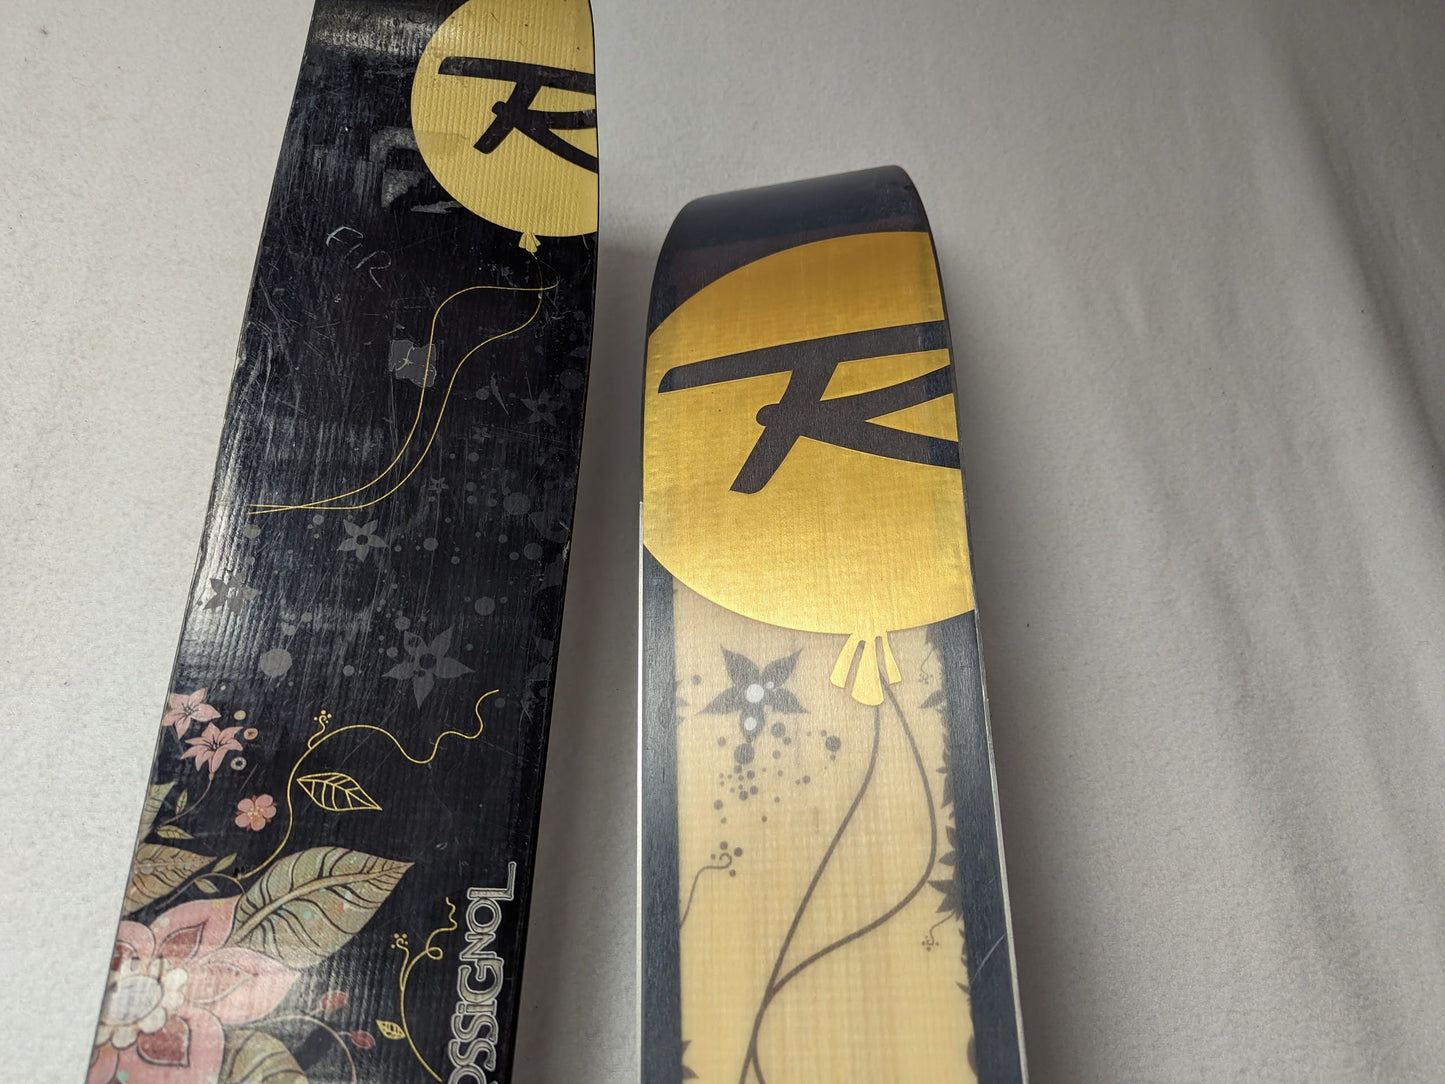 Rossignol S110W Skis w/Rossignol Bindings Size 168 cm Color Black Condition Used